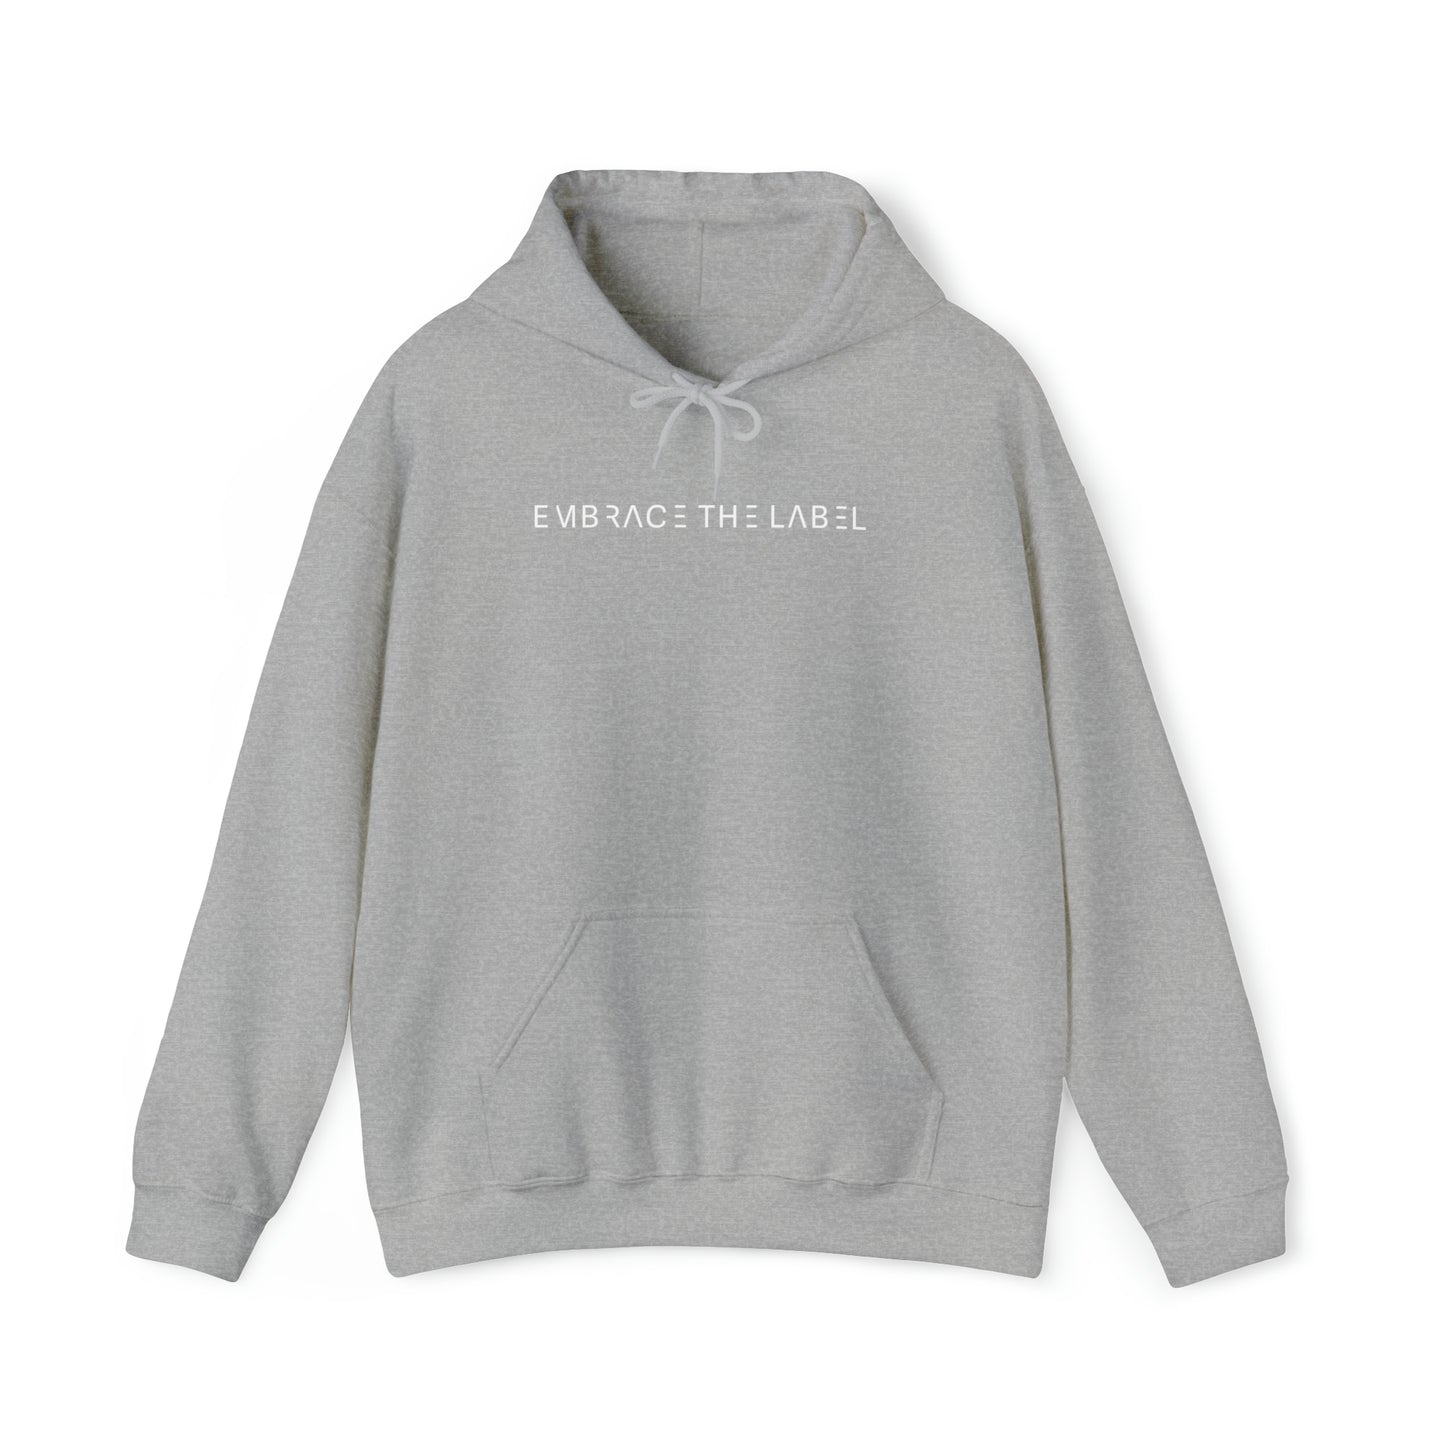 Madi Gillespie: Embrace The Label Hoodie